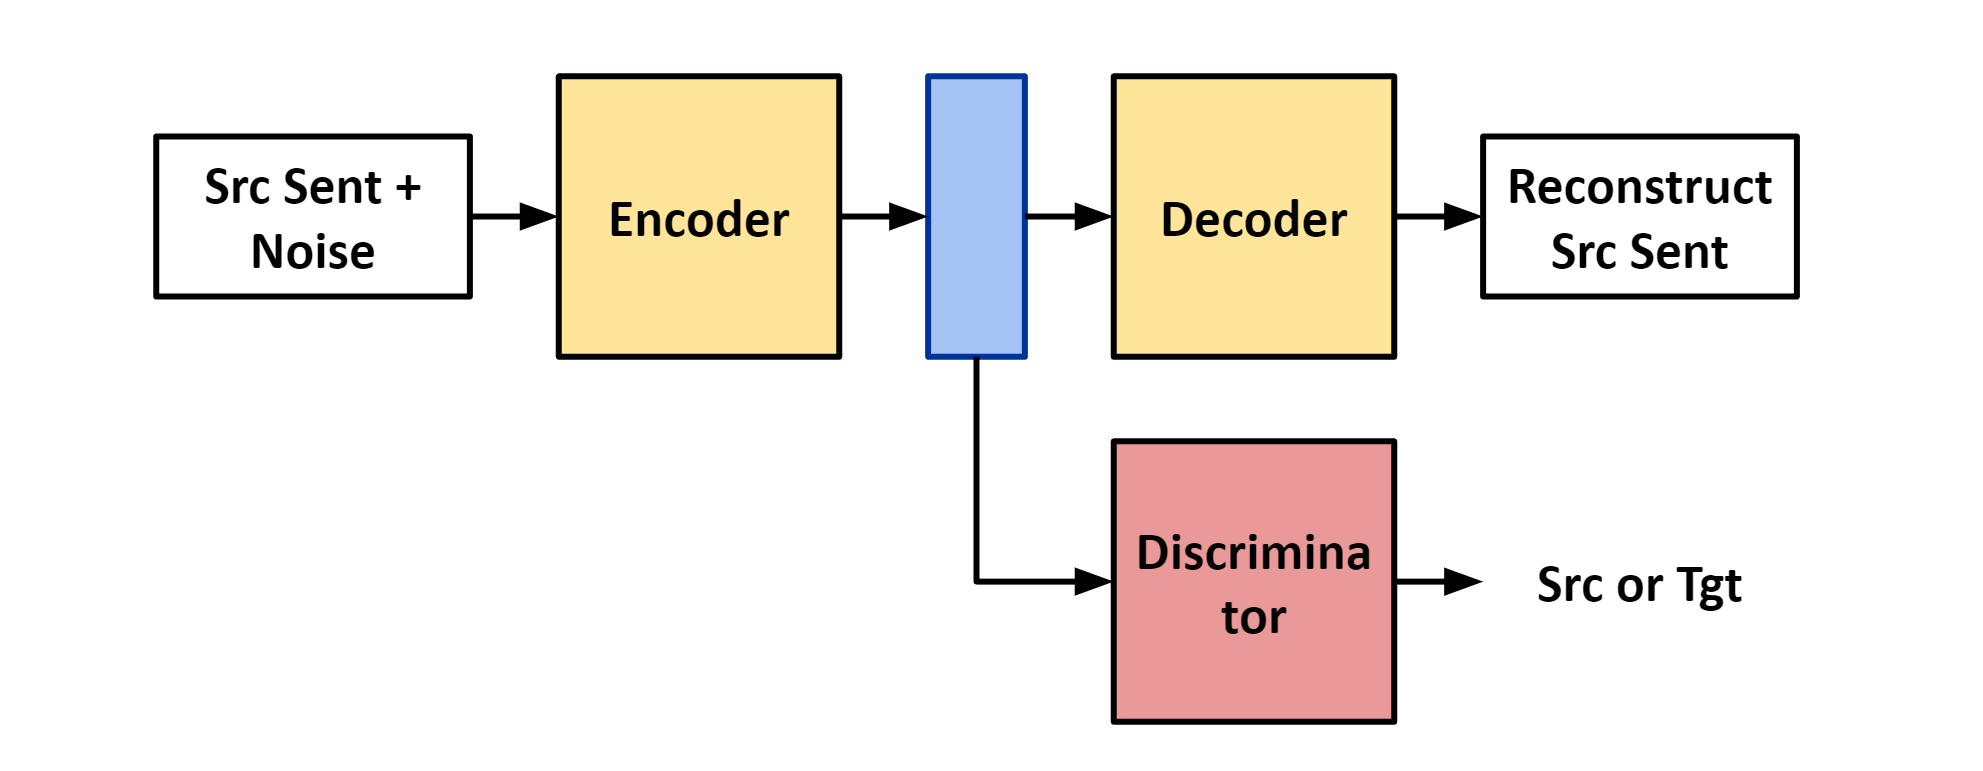 Diagram of Adversarial Approach. The discriminator’s objective is to classify the source of
the latent embedding. The encoder’s training objective is to reconstruct the corrupted sentence and to
confuse the discriminator. Figure by Author